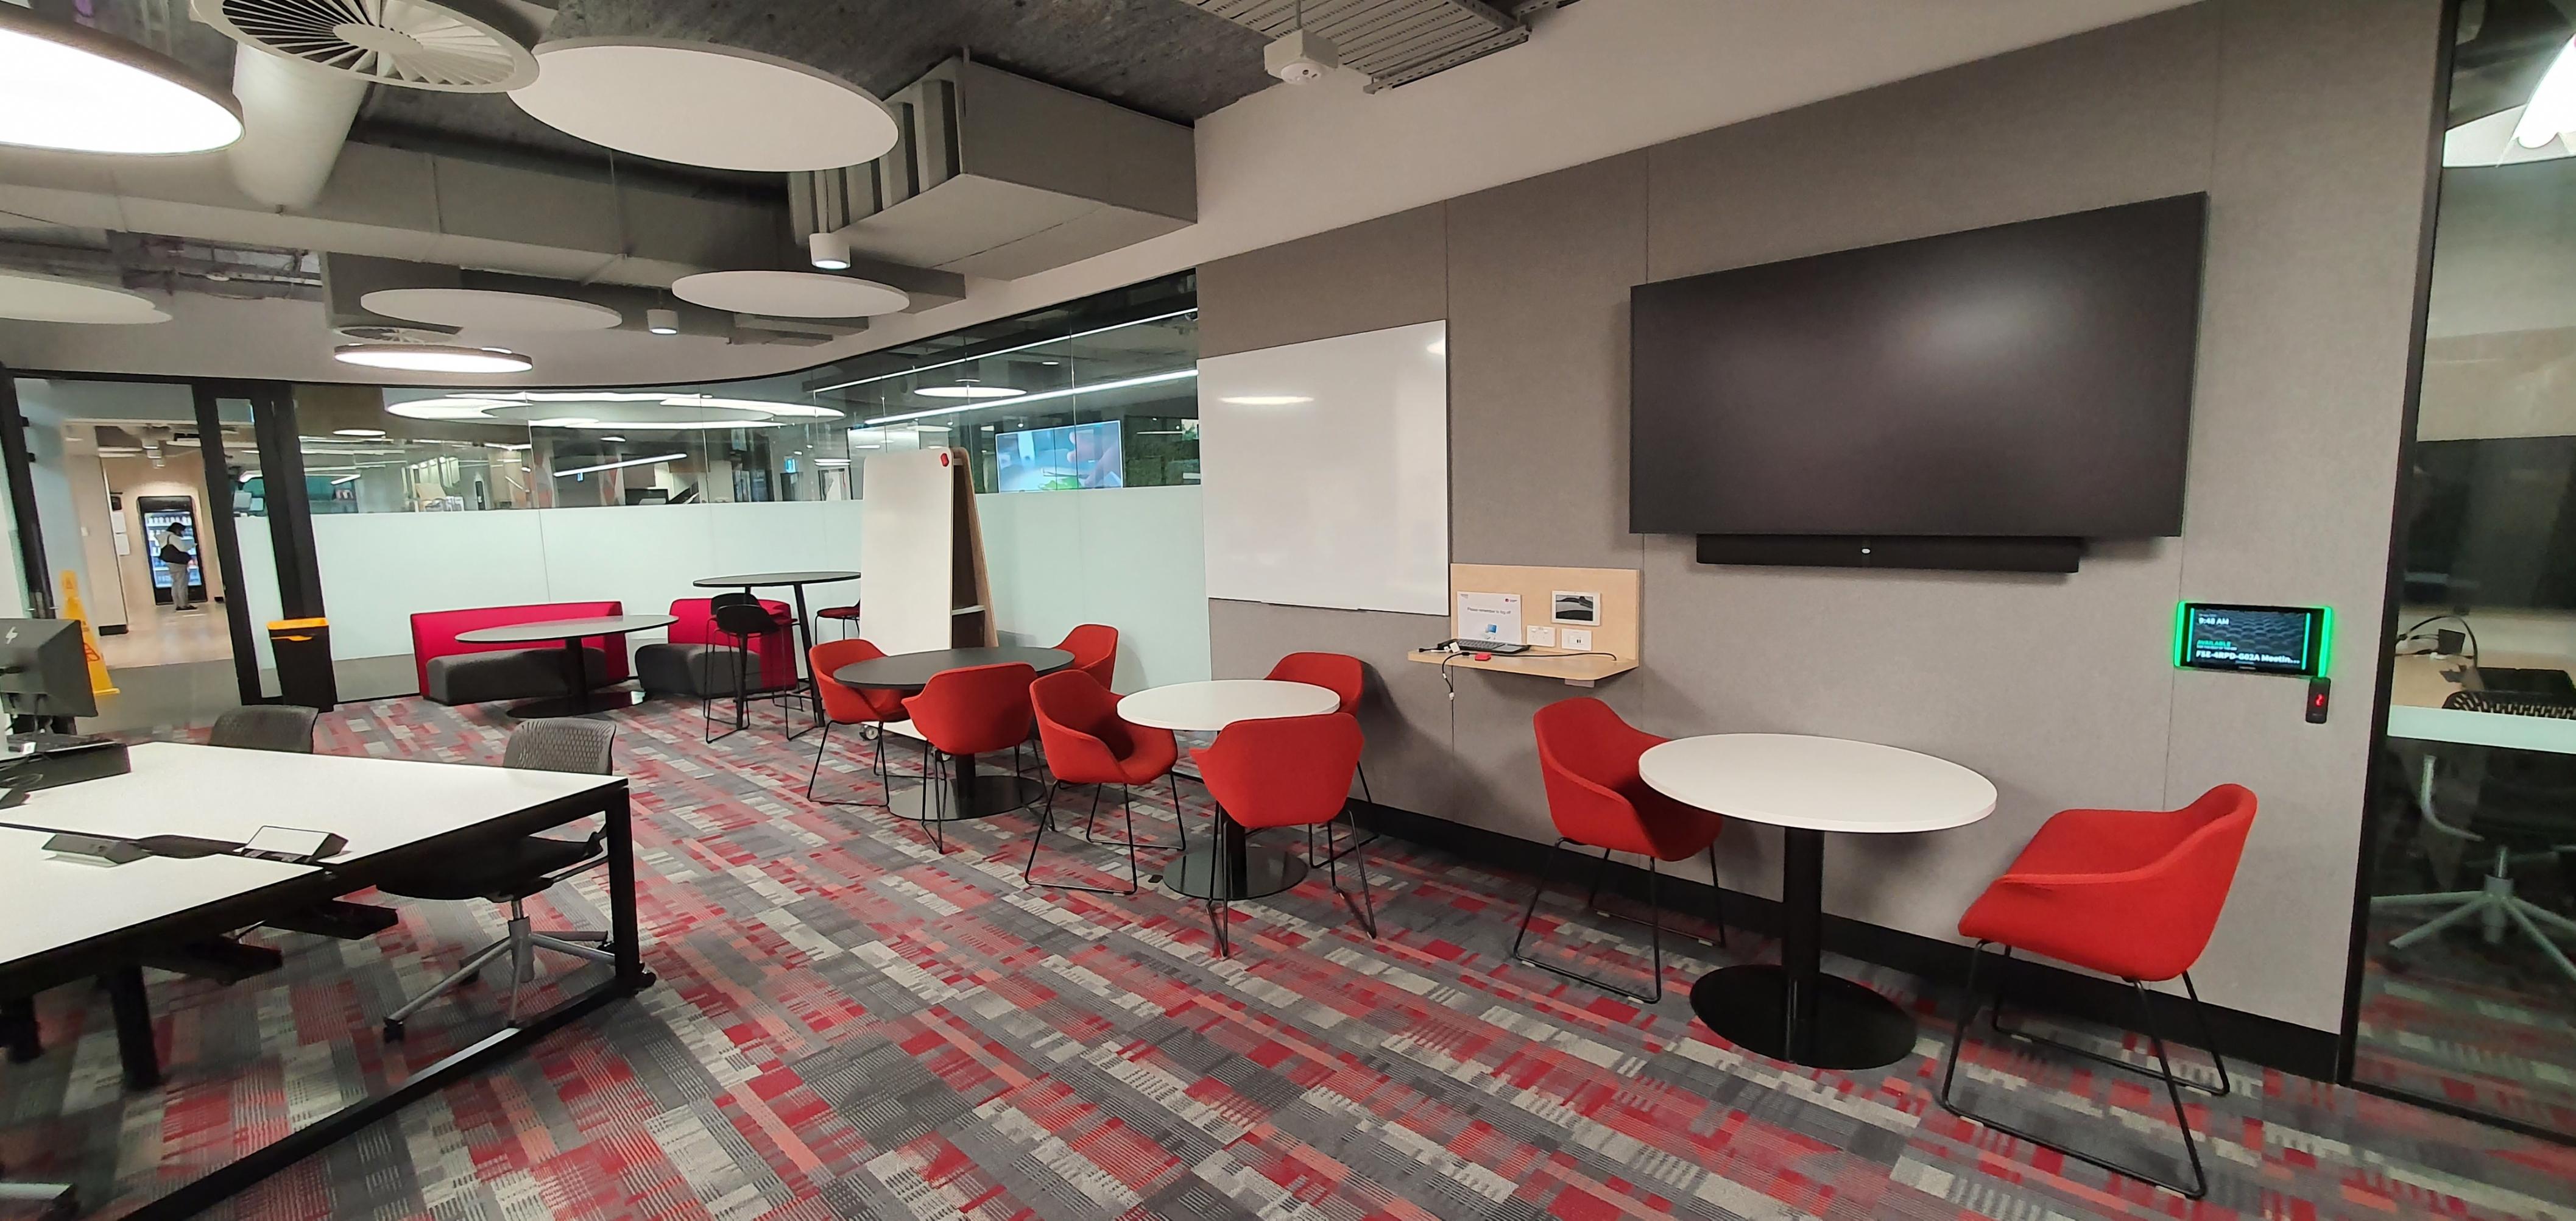 The drop-in centre at 4 Research Park Drive. It is a large, brightly-lit room with several small tables surrounded by chairs. There are white boards and screens mounted on the wall.